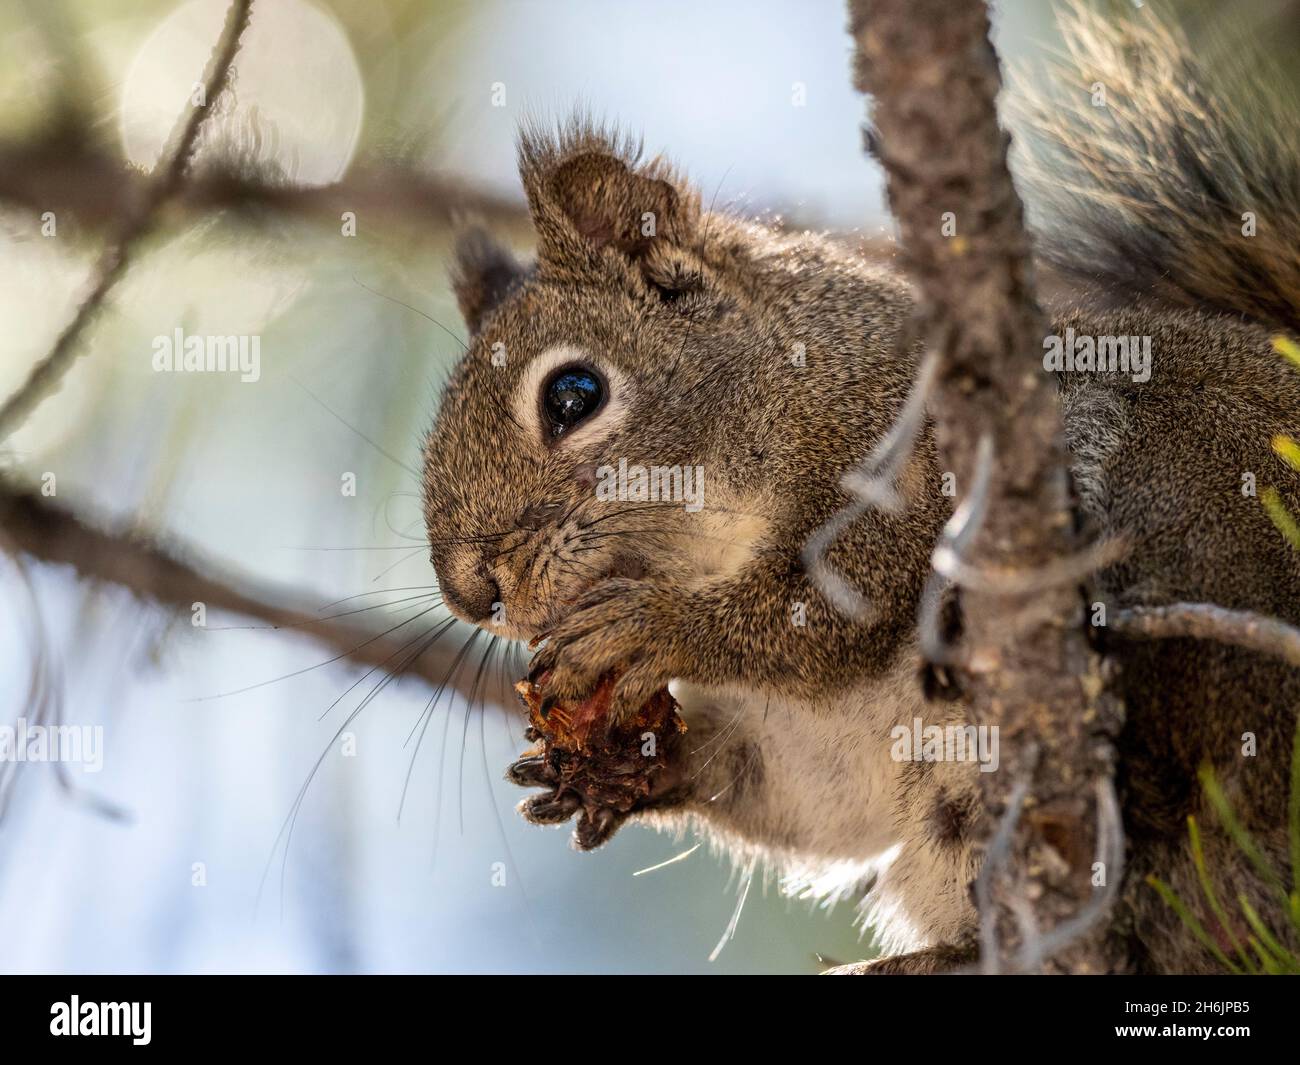 An adult American red squirrel (Tamiasciurus hudsonicus, in Yellowstone National Park, Wyoming, United States of America, North America Stock Photo